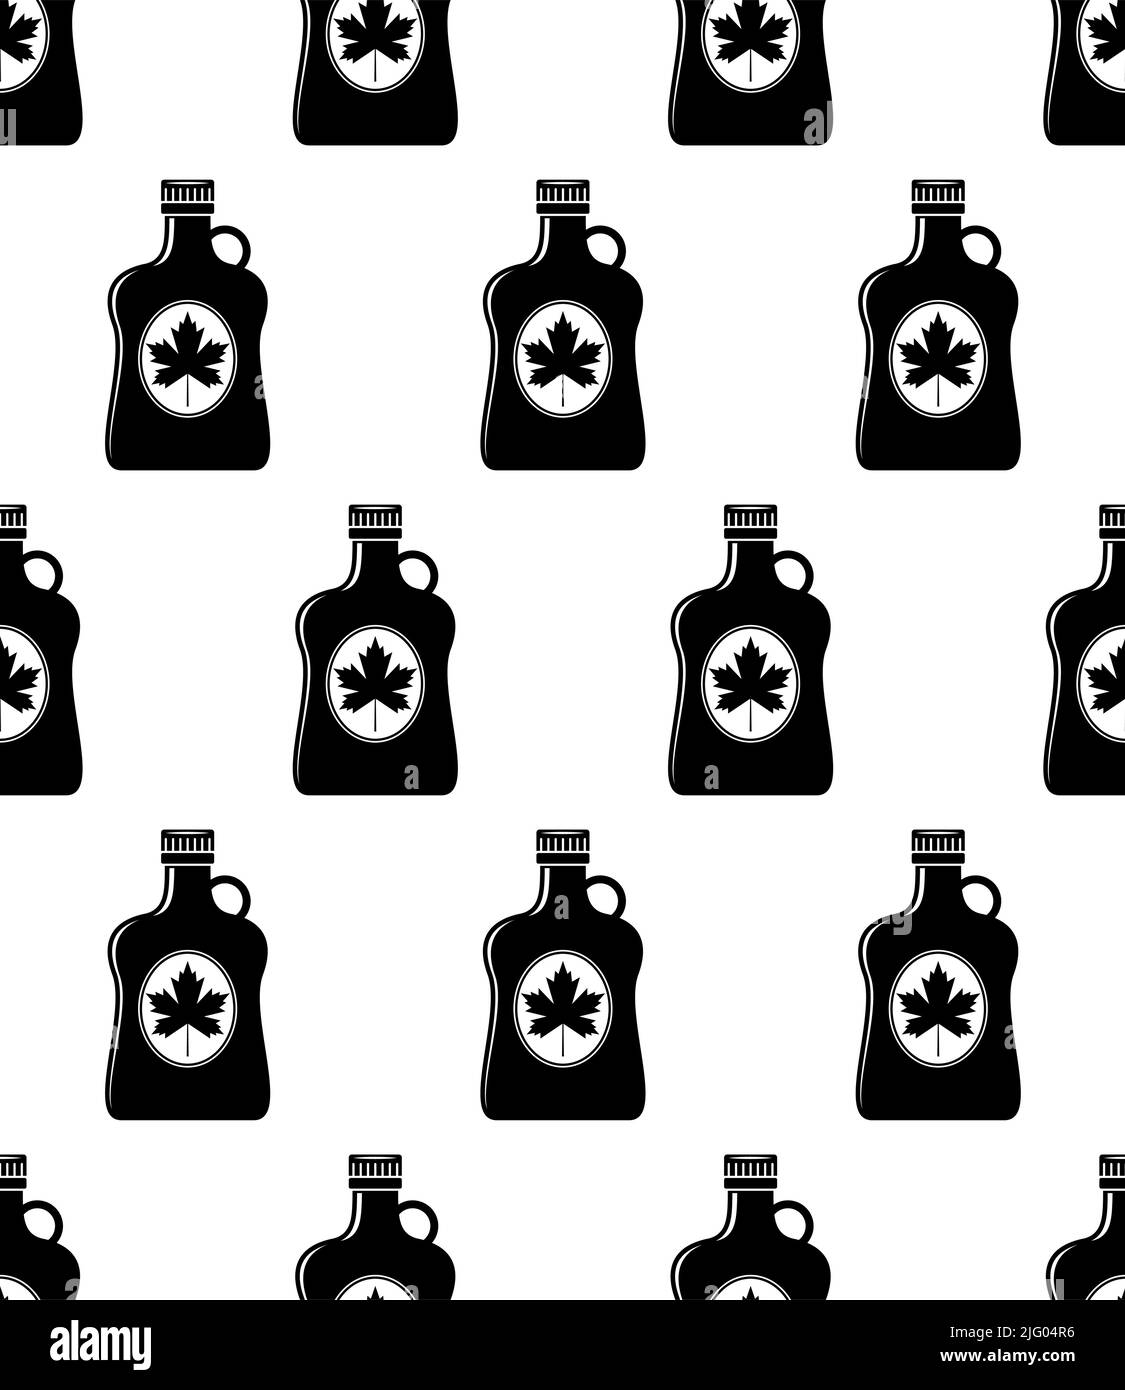 Maple Syrup Icon Seamless Pattern, Bottle Of Maple Tree Syrup Vector Art Illustration Stock Vector